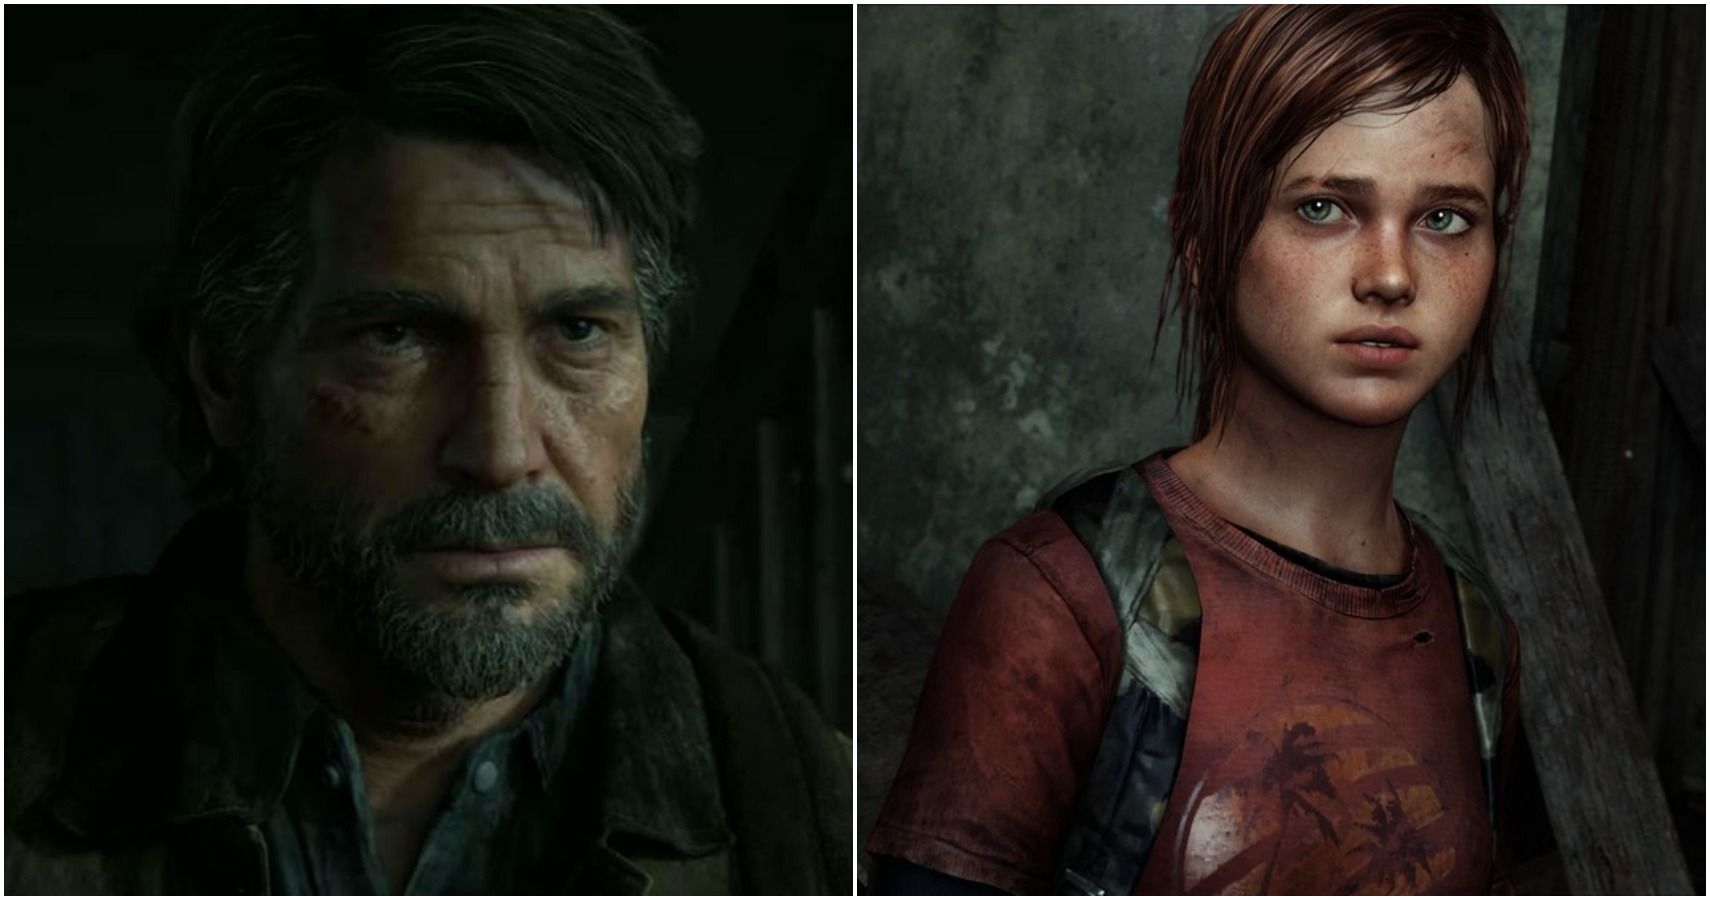 The Internet Has Already Decided Which Actor Should Play Joel In